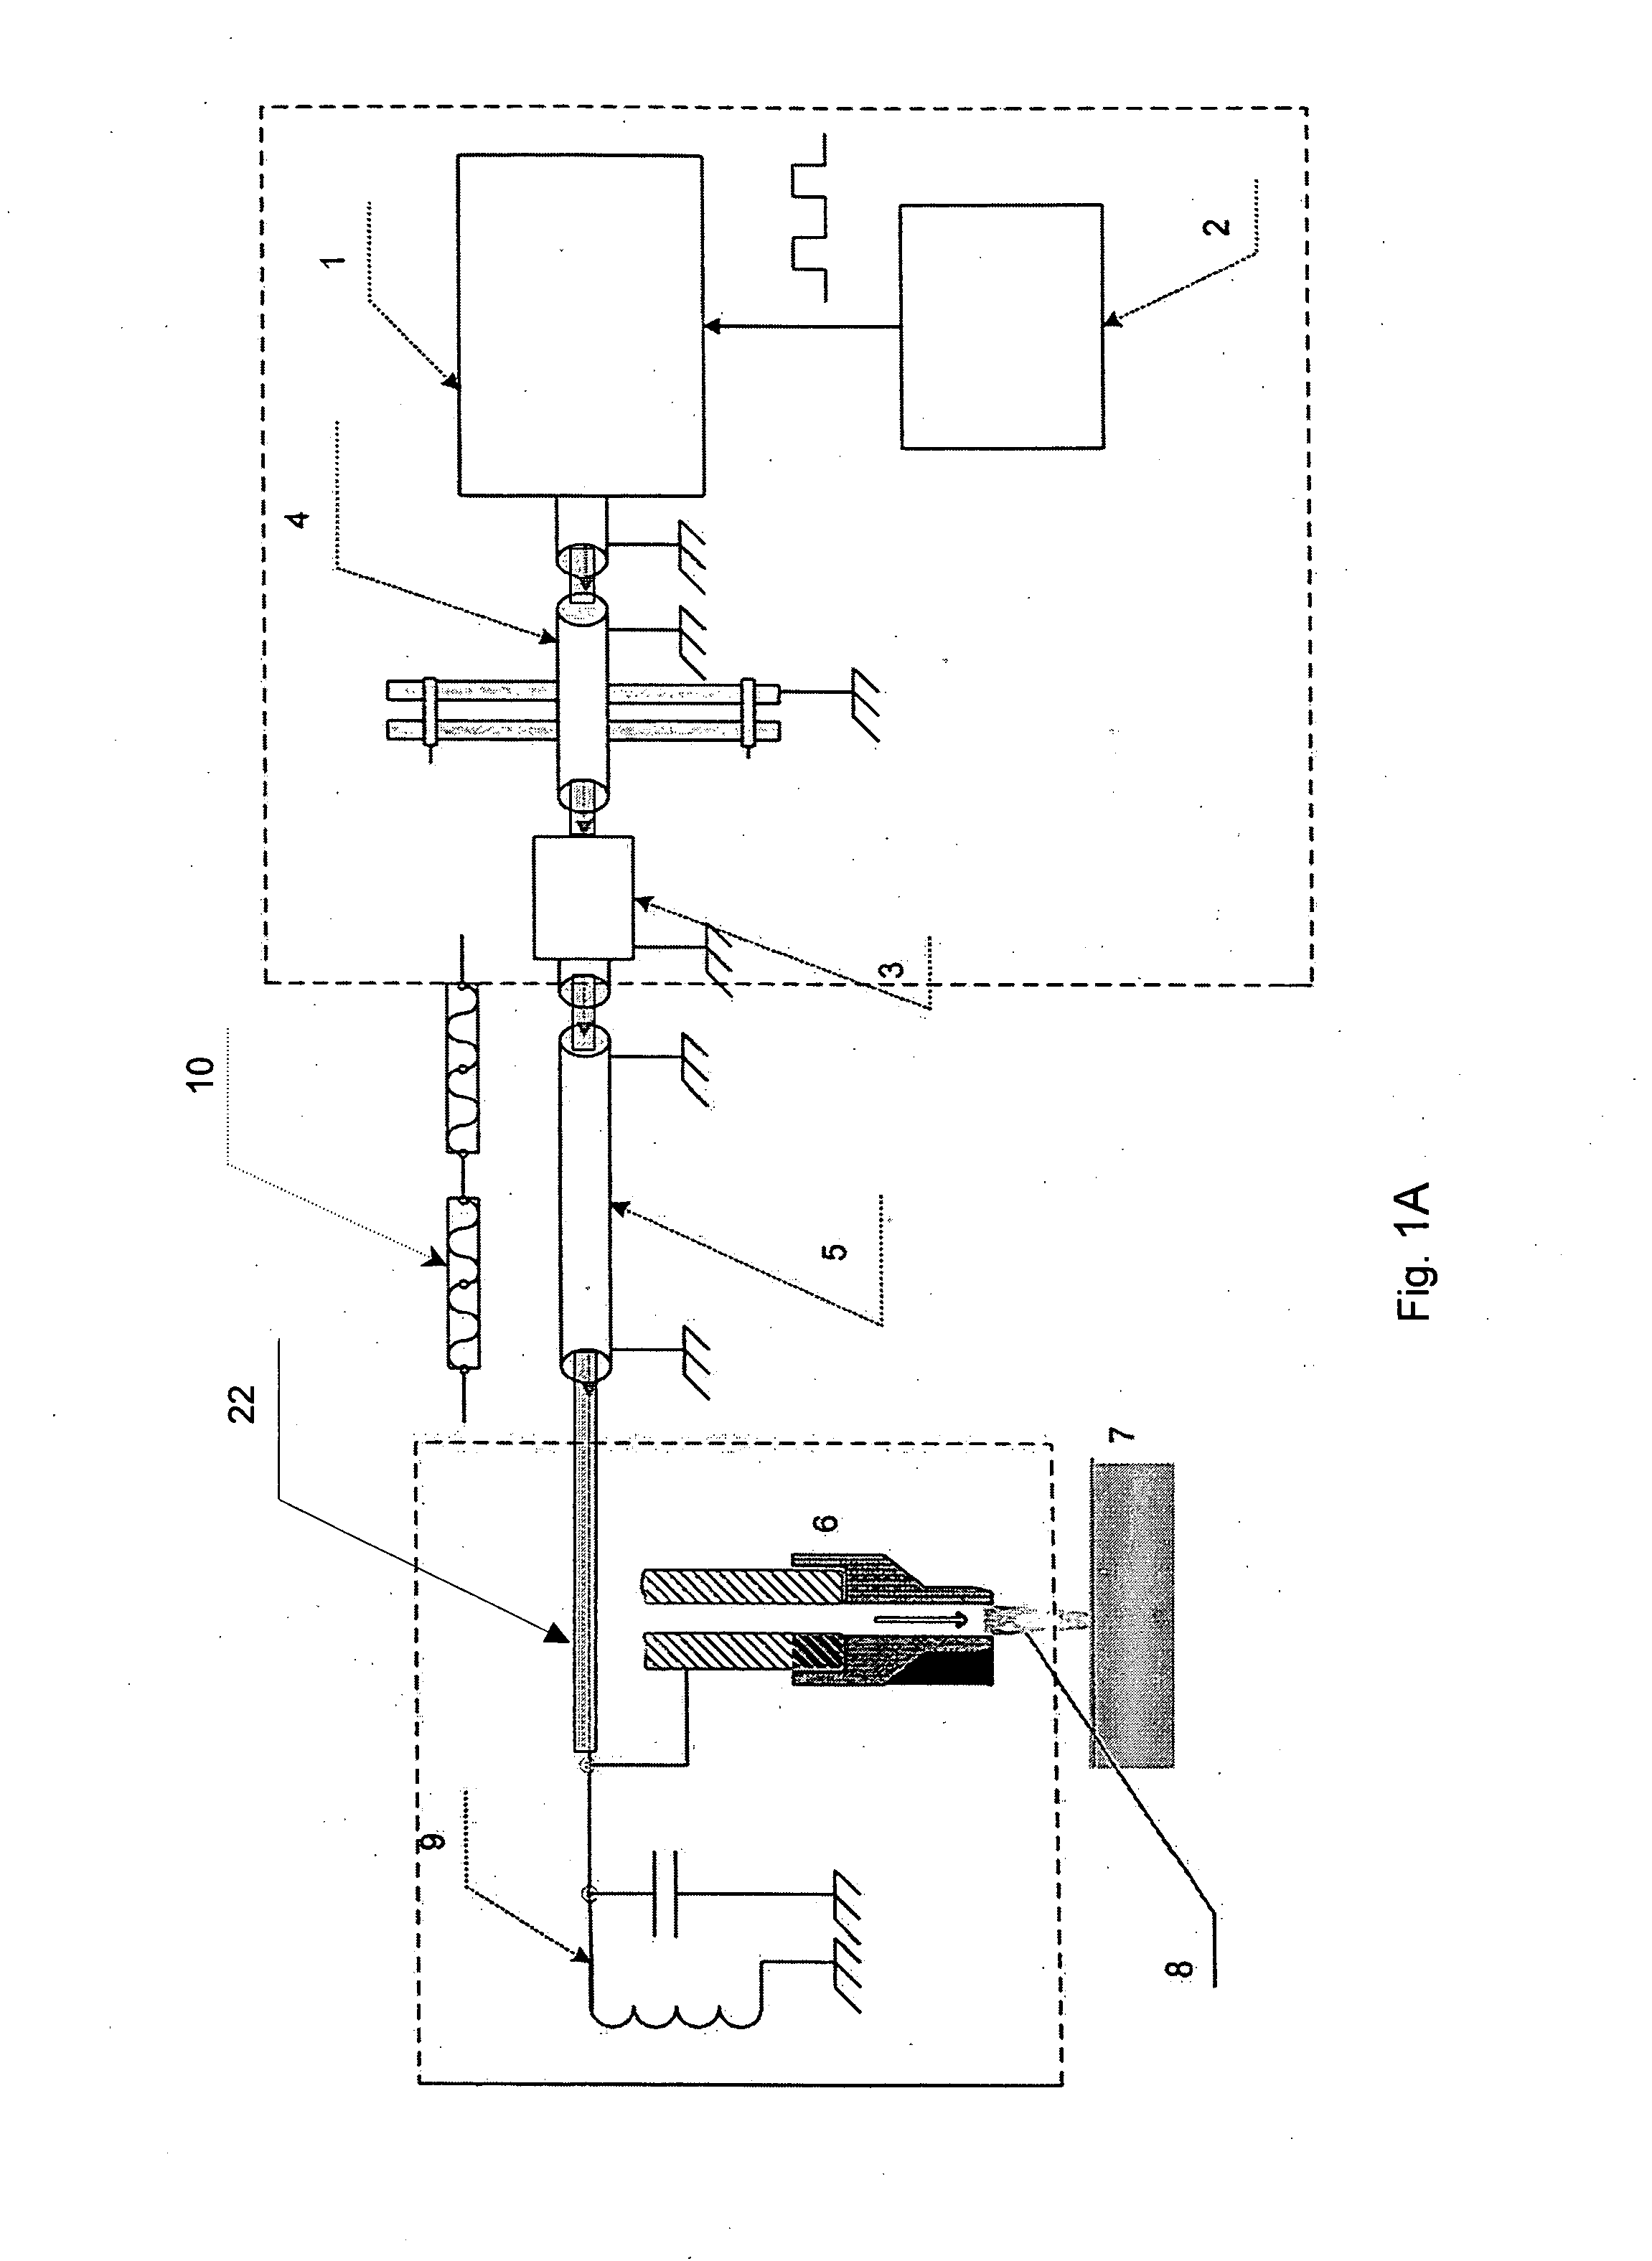 System and method for treating biological tissue with a plasma gas discharge